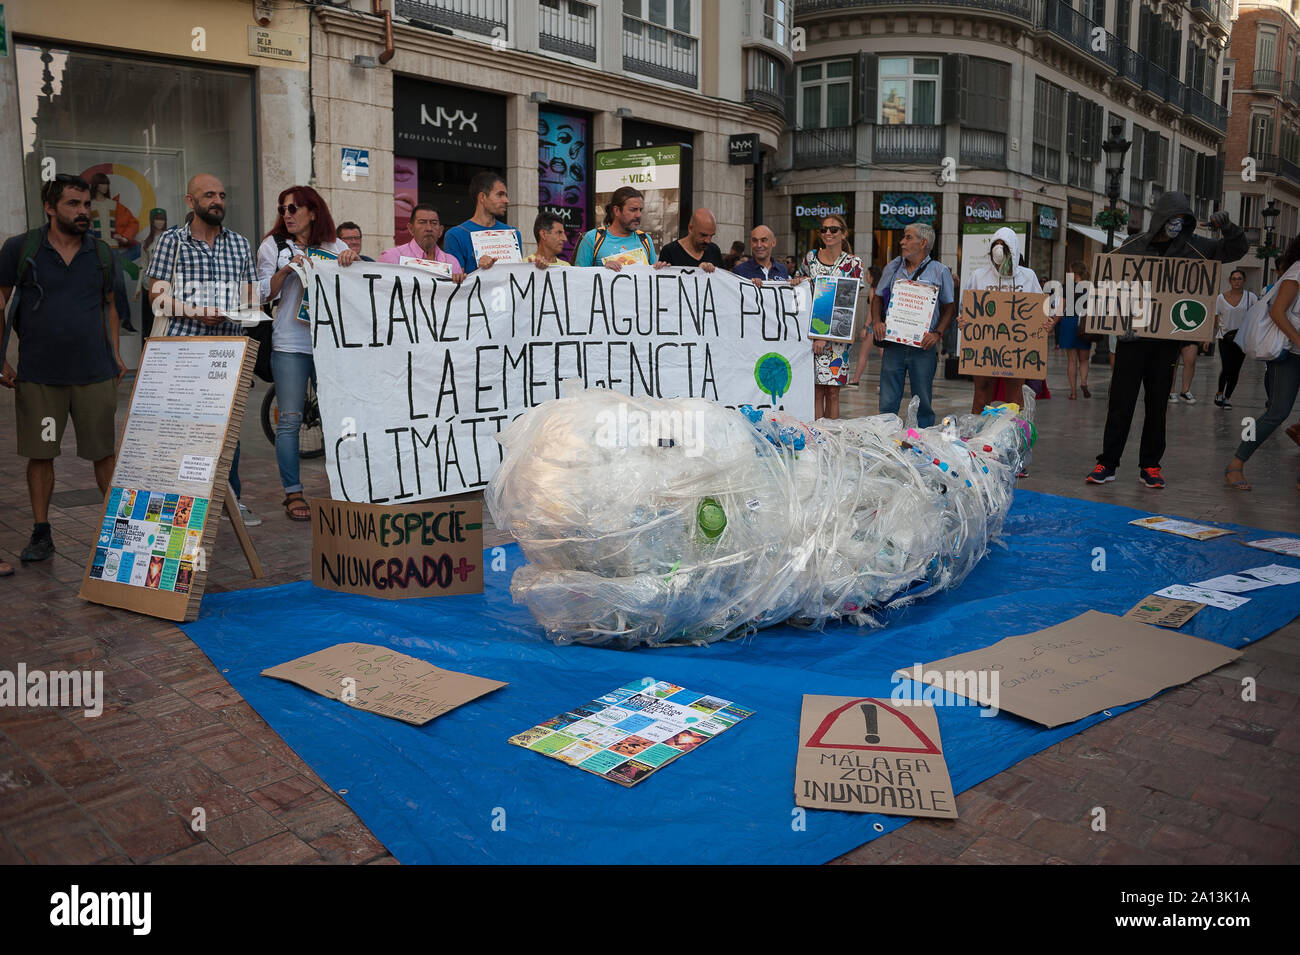 A sperm-whale made of plastics and wastes during the protest.Members of 'Malaga's alliance for the climate emergency' made a performance denouncing the extinction of species caused by climate change and plastics pollution as part of events marking the 'Climate Week' in relation to global climate strikes. Stock Photo